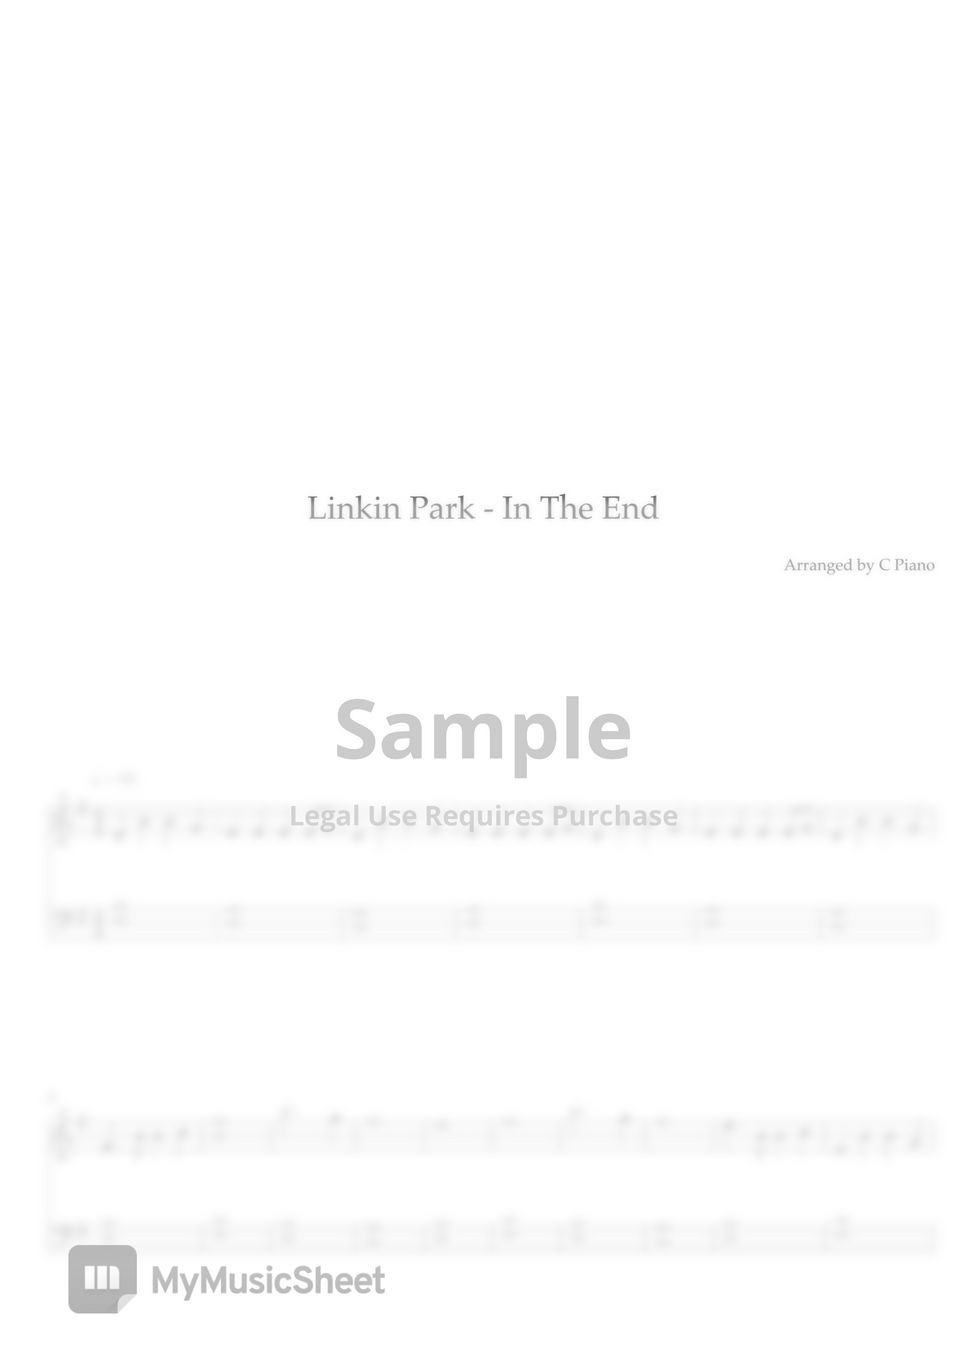 Linkin Park - In The End (Easy Version) by C Piano